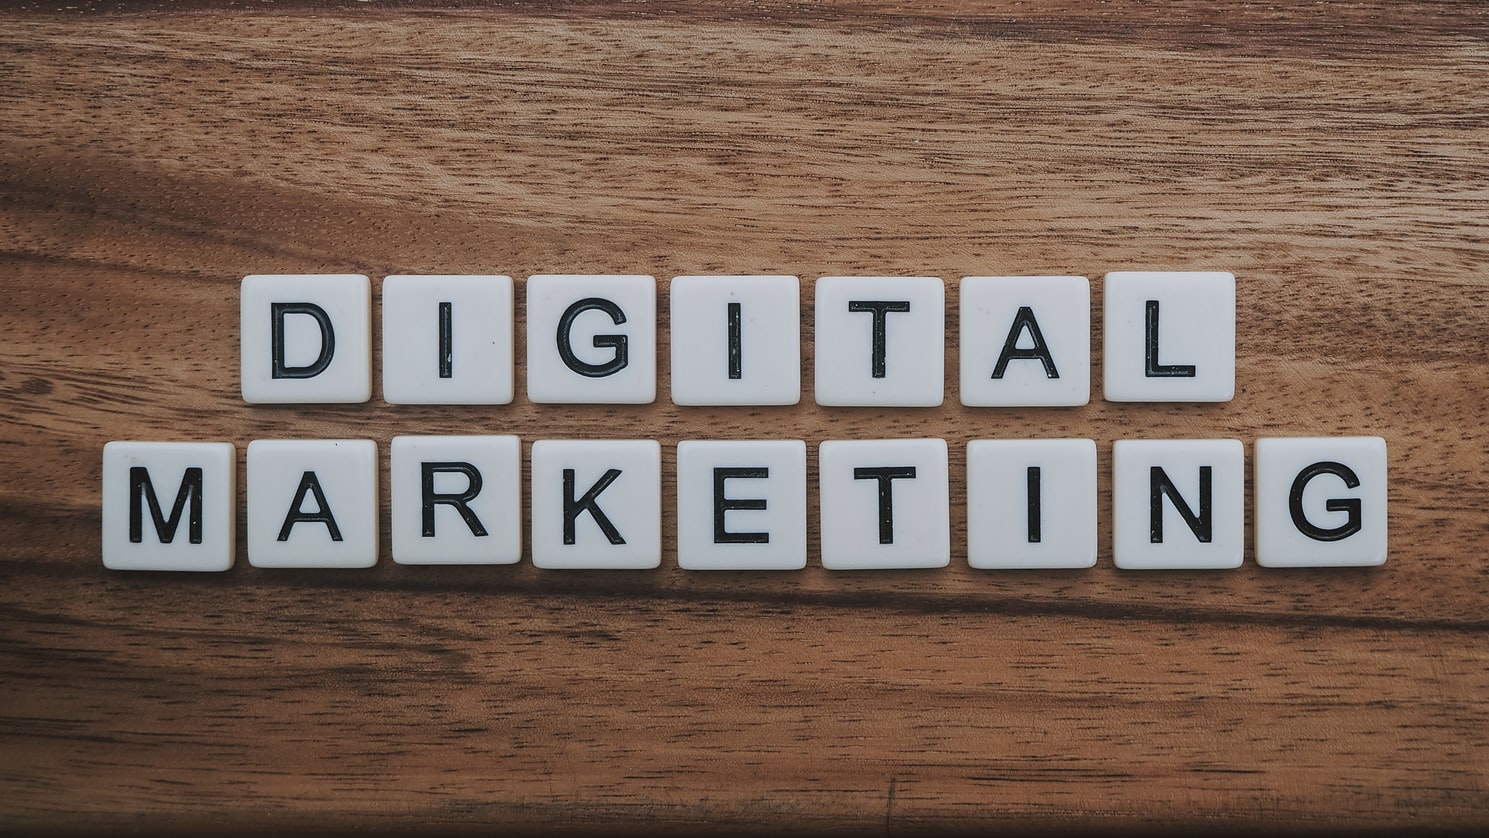 Taking advantage of your digital marketing doesn’t have to be expensive!